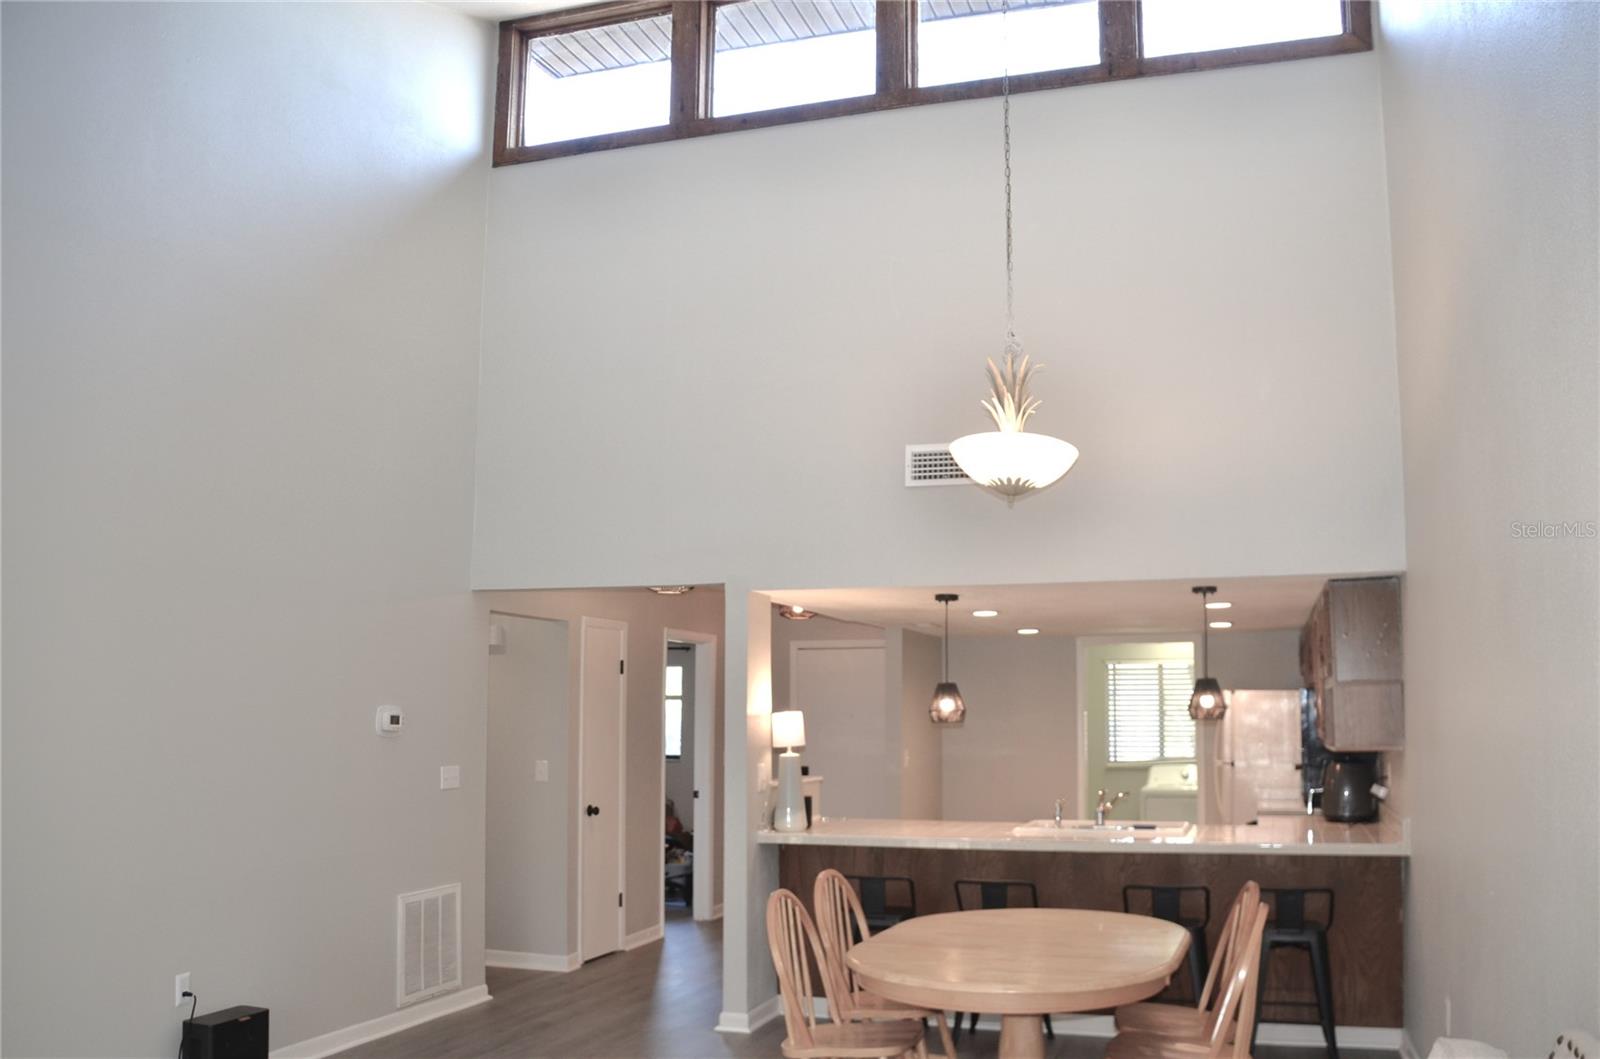 Transom windows in vaulted ceiling allows natural light